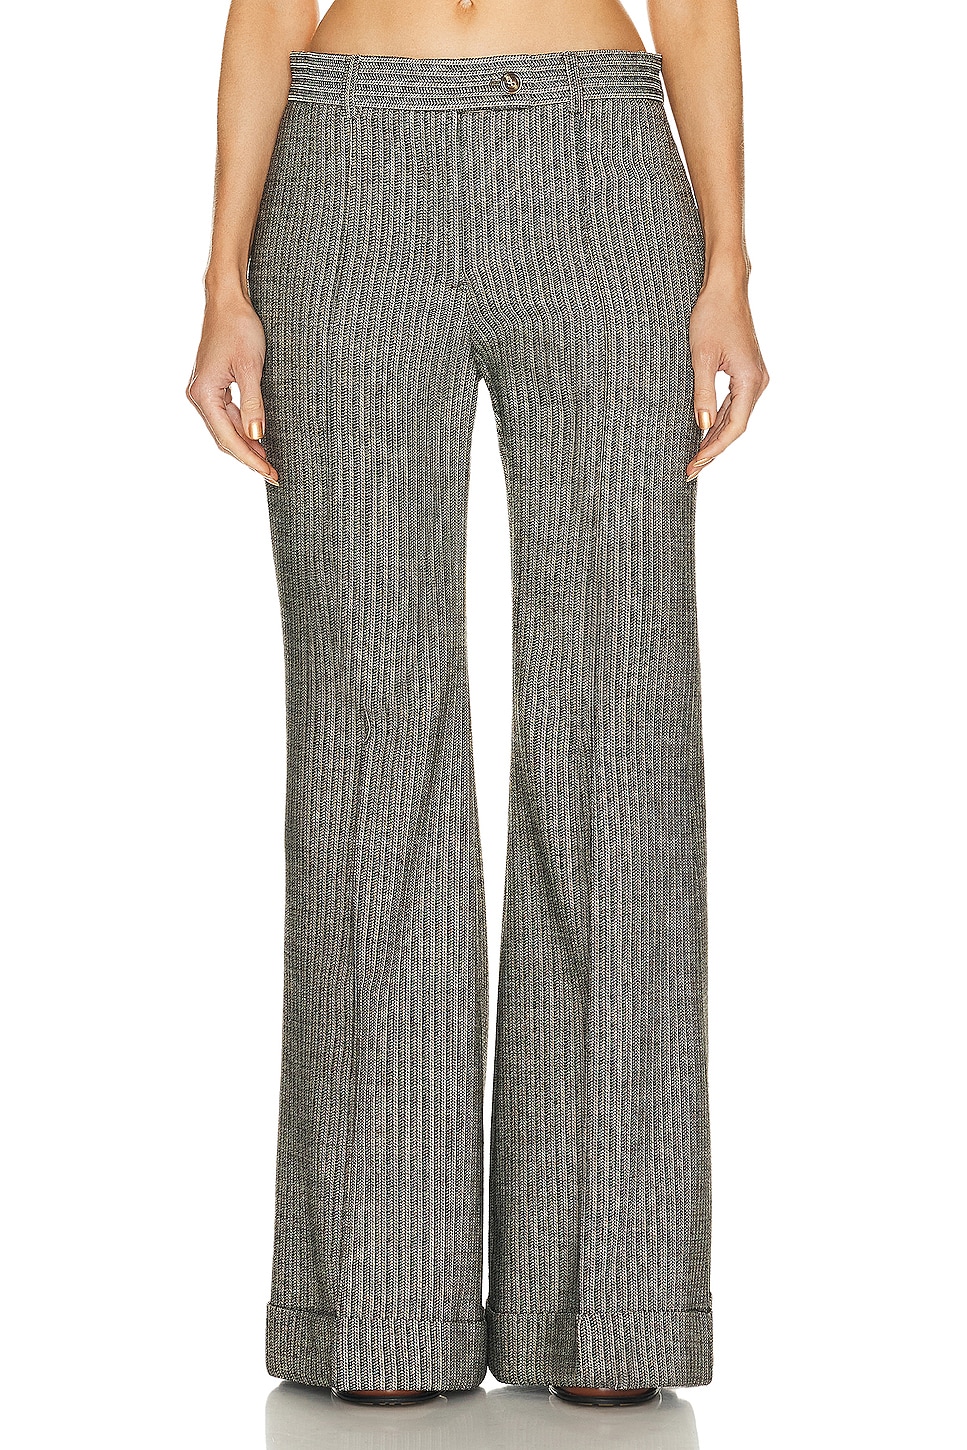 Image 1 of Acne Studios Wide Leg Pant in Multi Taupe